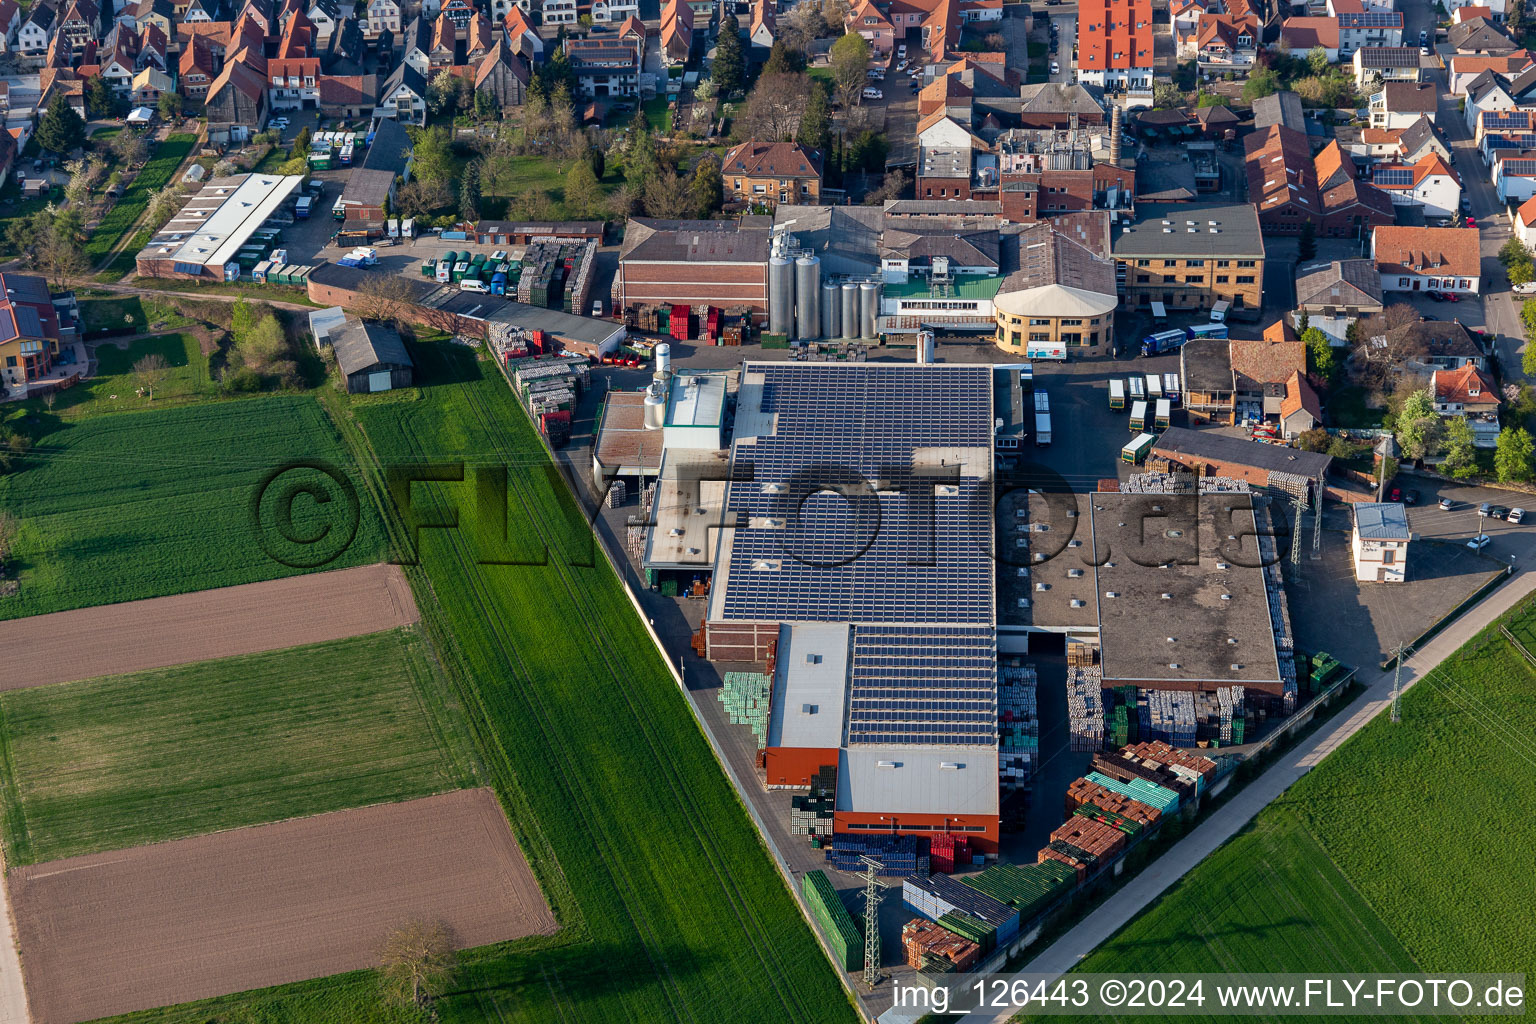 Aerial photograpy of Factory premises of the BELLHEIMER BRAUEREI - PARK & Bellheimer breweries GmbH & Co. KG in Bellheim in the state Rhineland-Palatinate, Germany